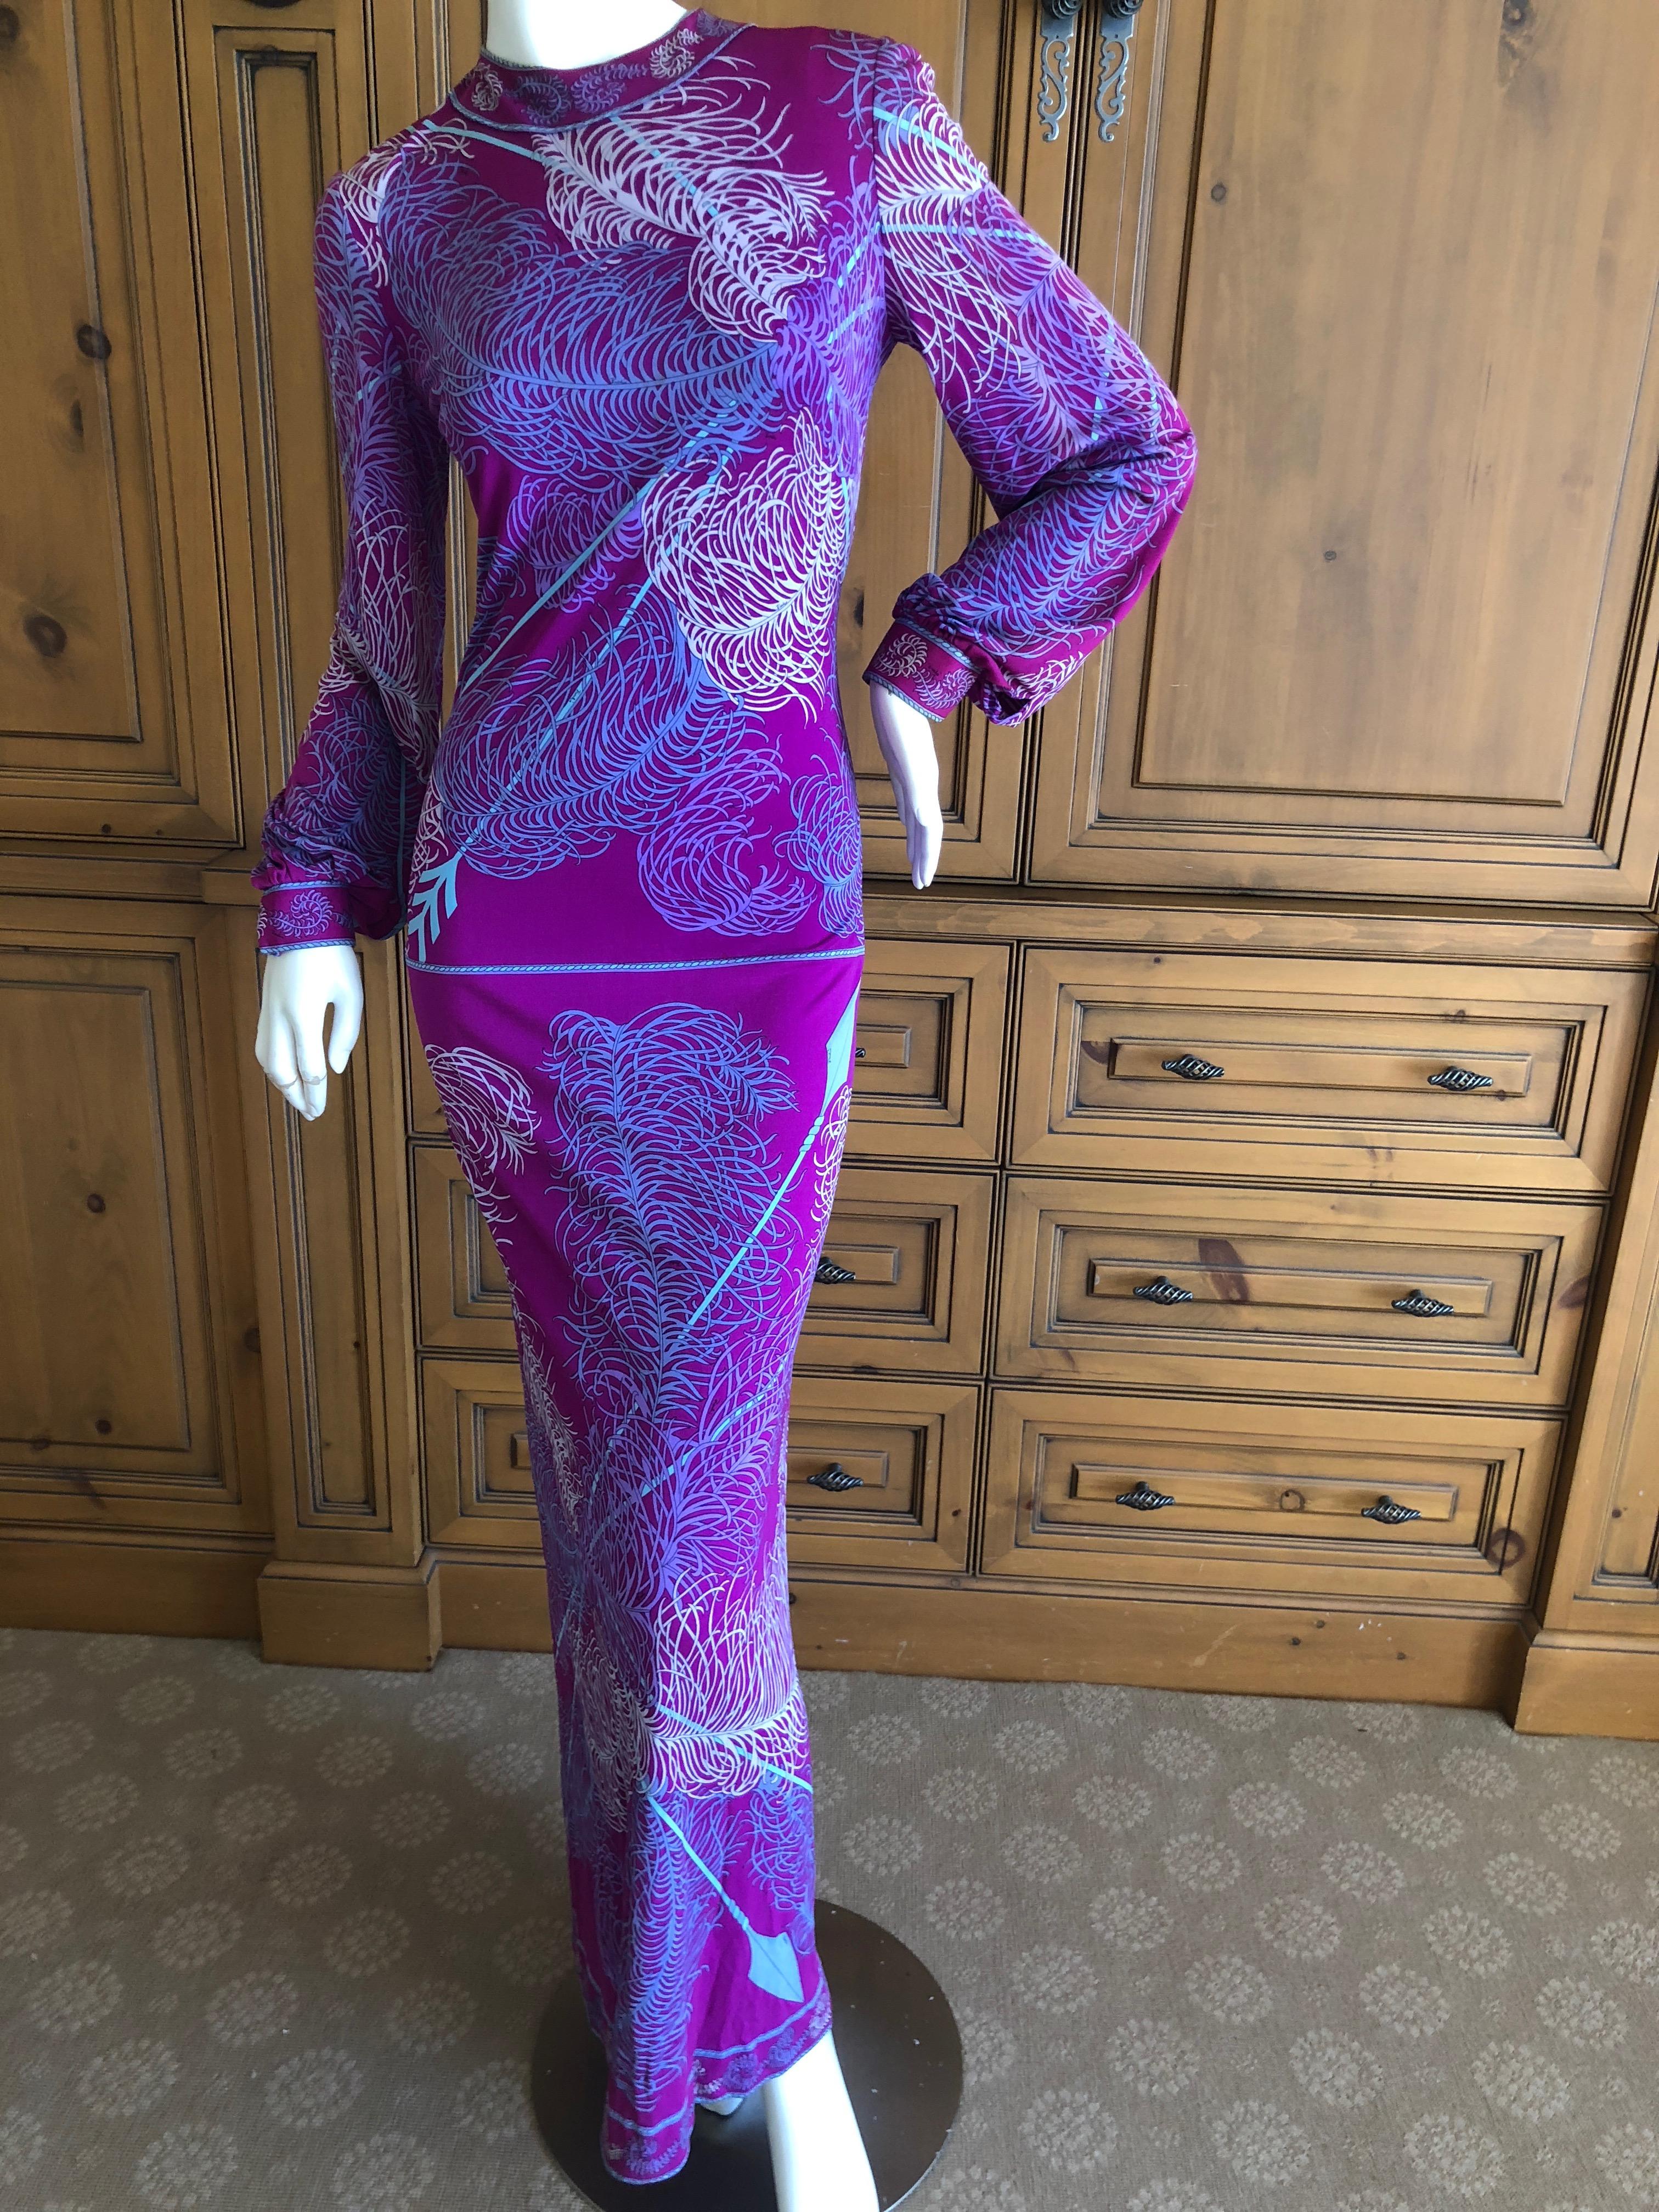 Emilio Pucci Rare Vintage 1960's Silk Jersey Feather Print Evening Dress for Saks Fifth Avenue.
Feather and spear motif, from the 60's but in excellent condition.
Size 8
Bust 34